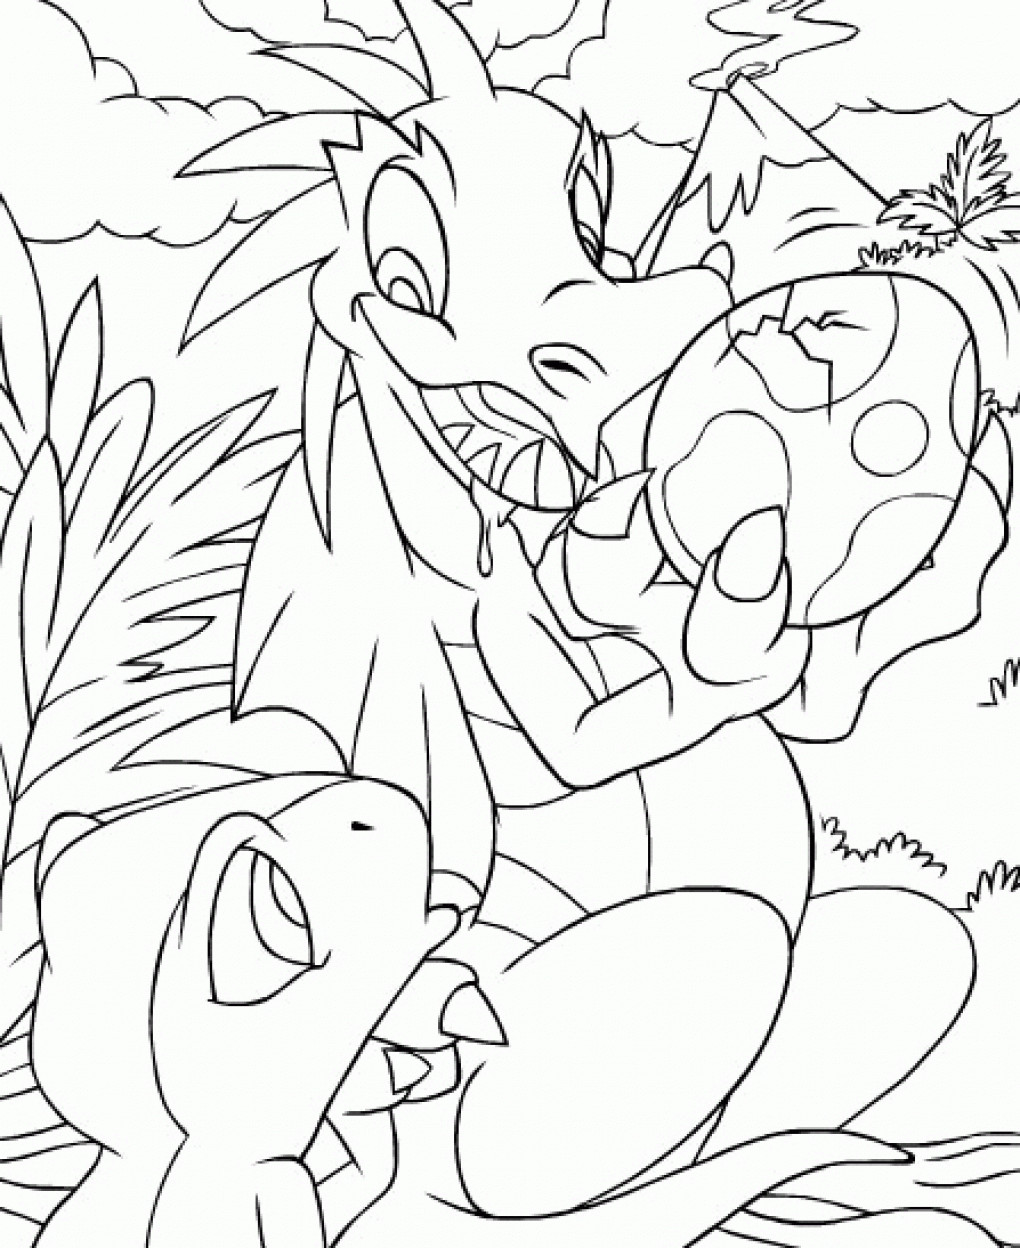 Printable Coloring Pages For Children
 Free Printable Neopets Coloring Pages For kids